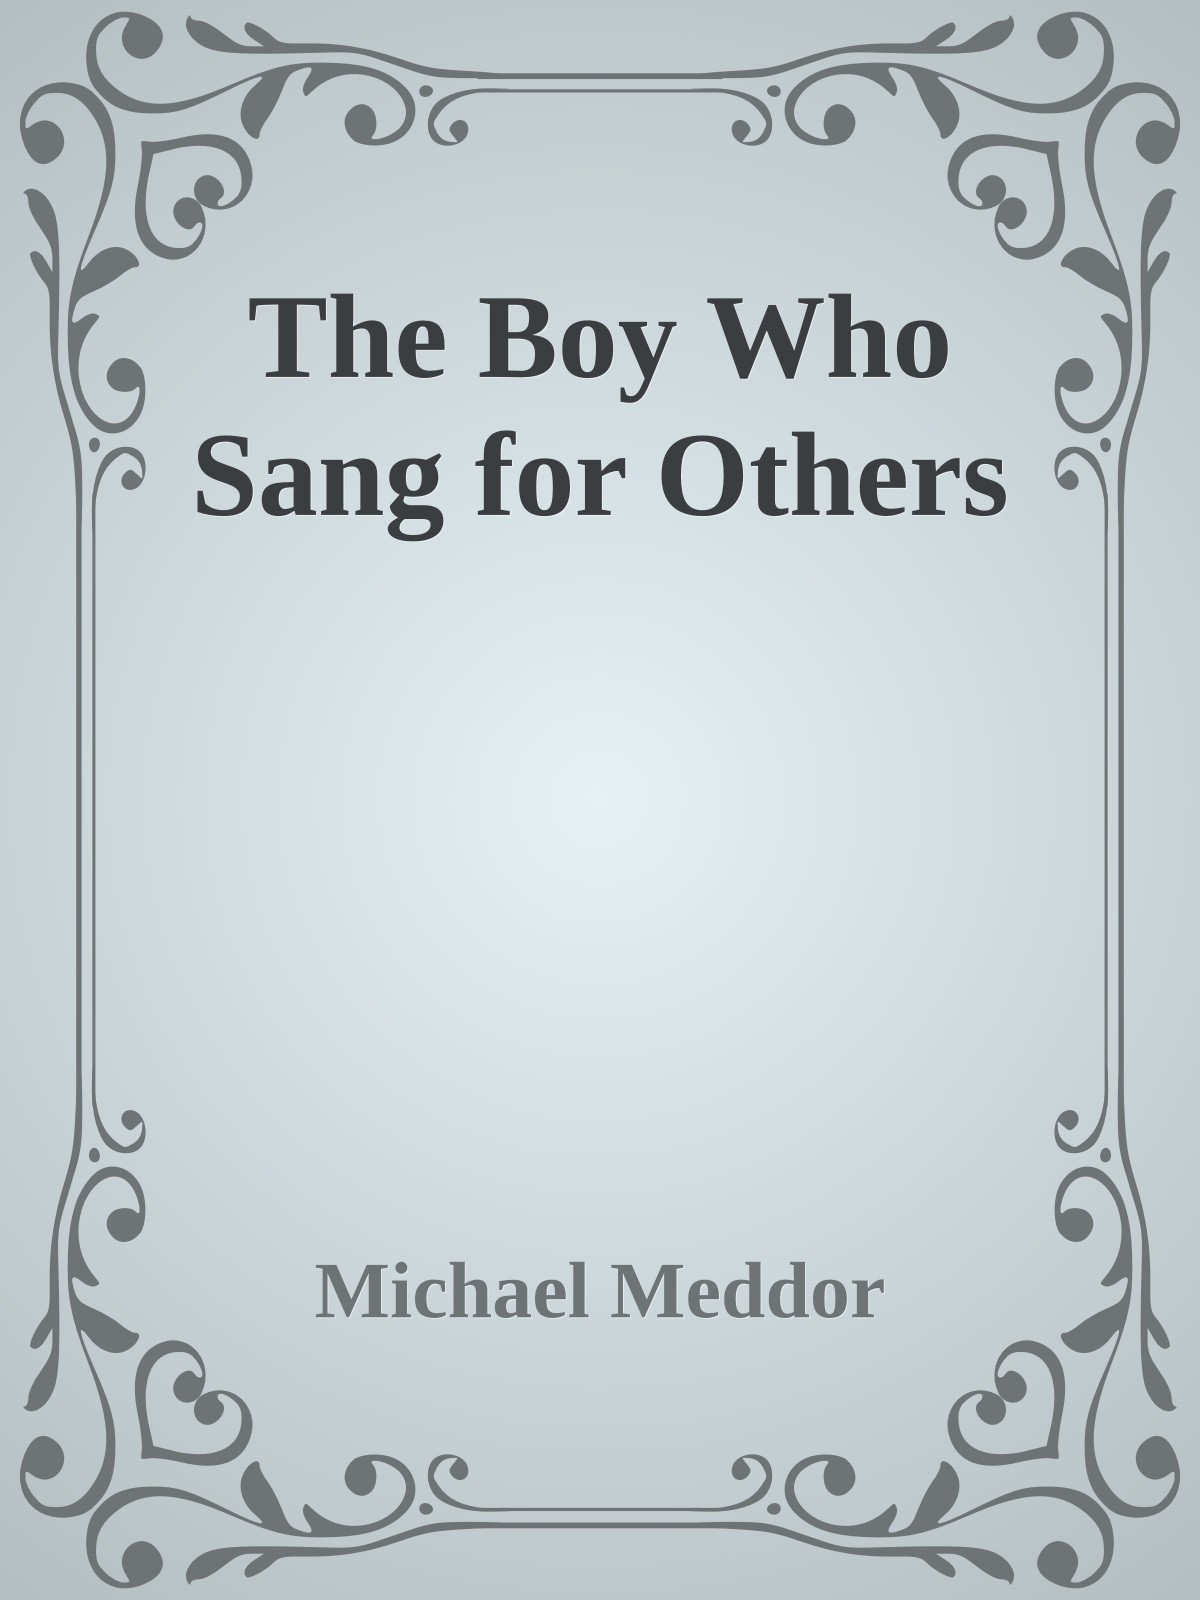 The Boy Who Sang for Others